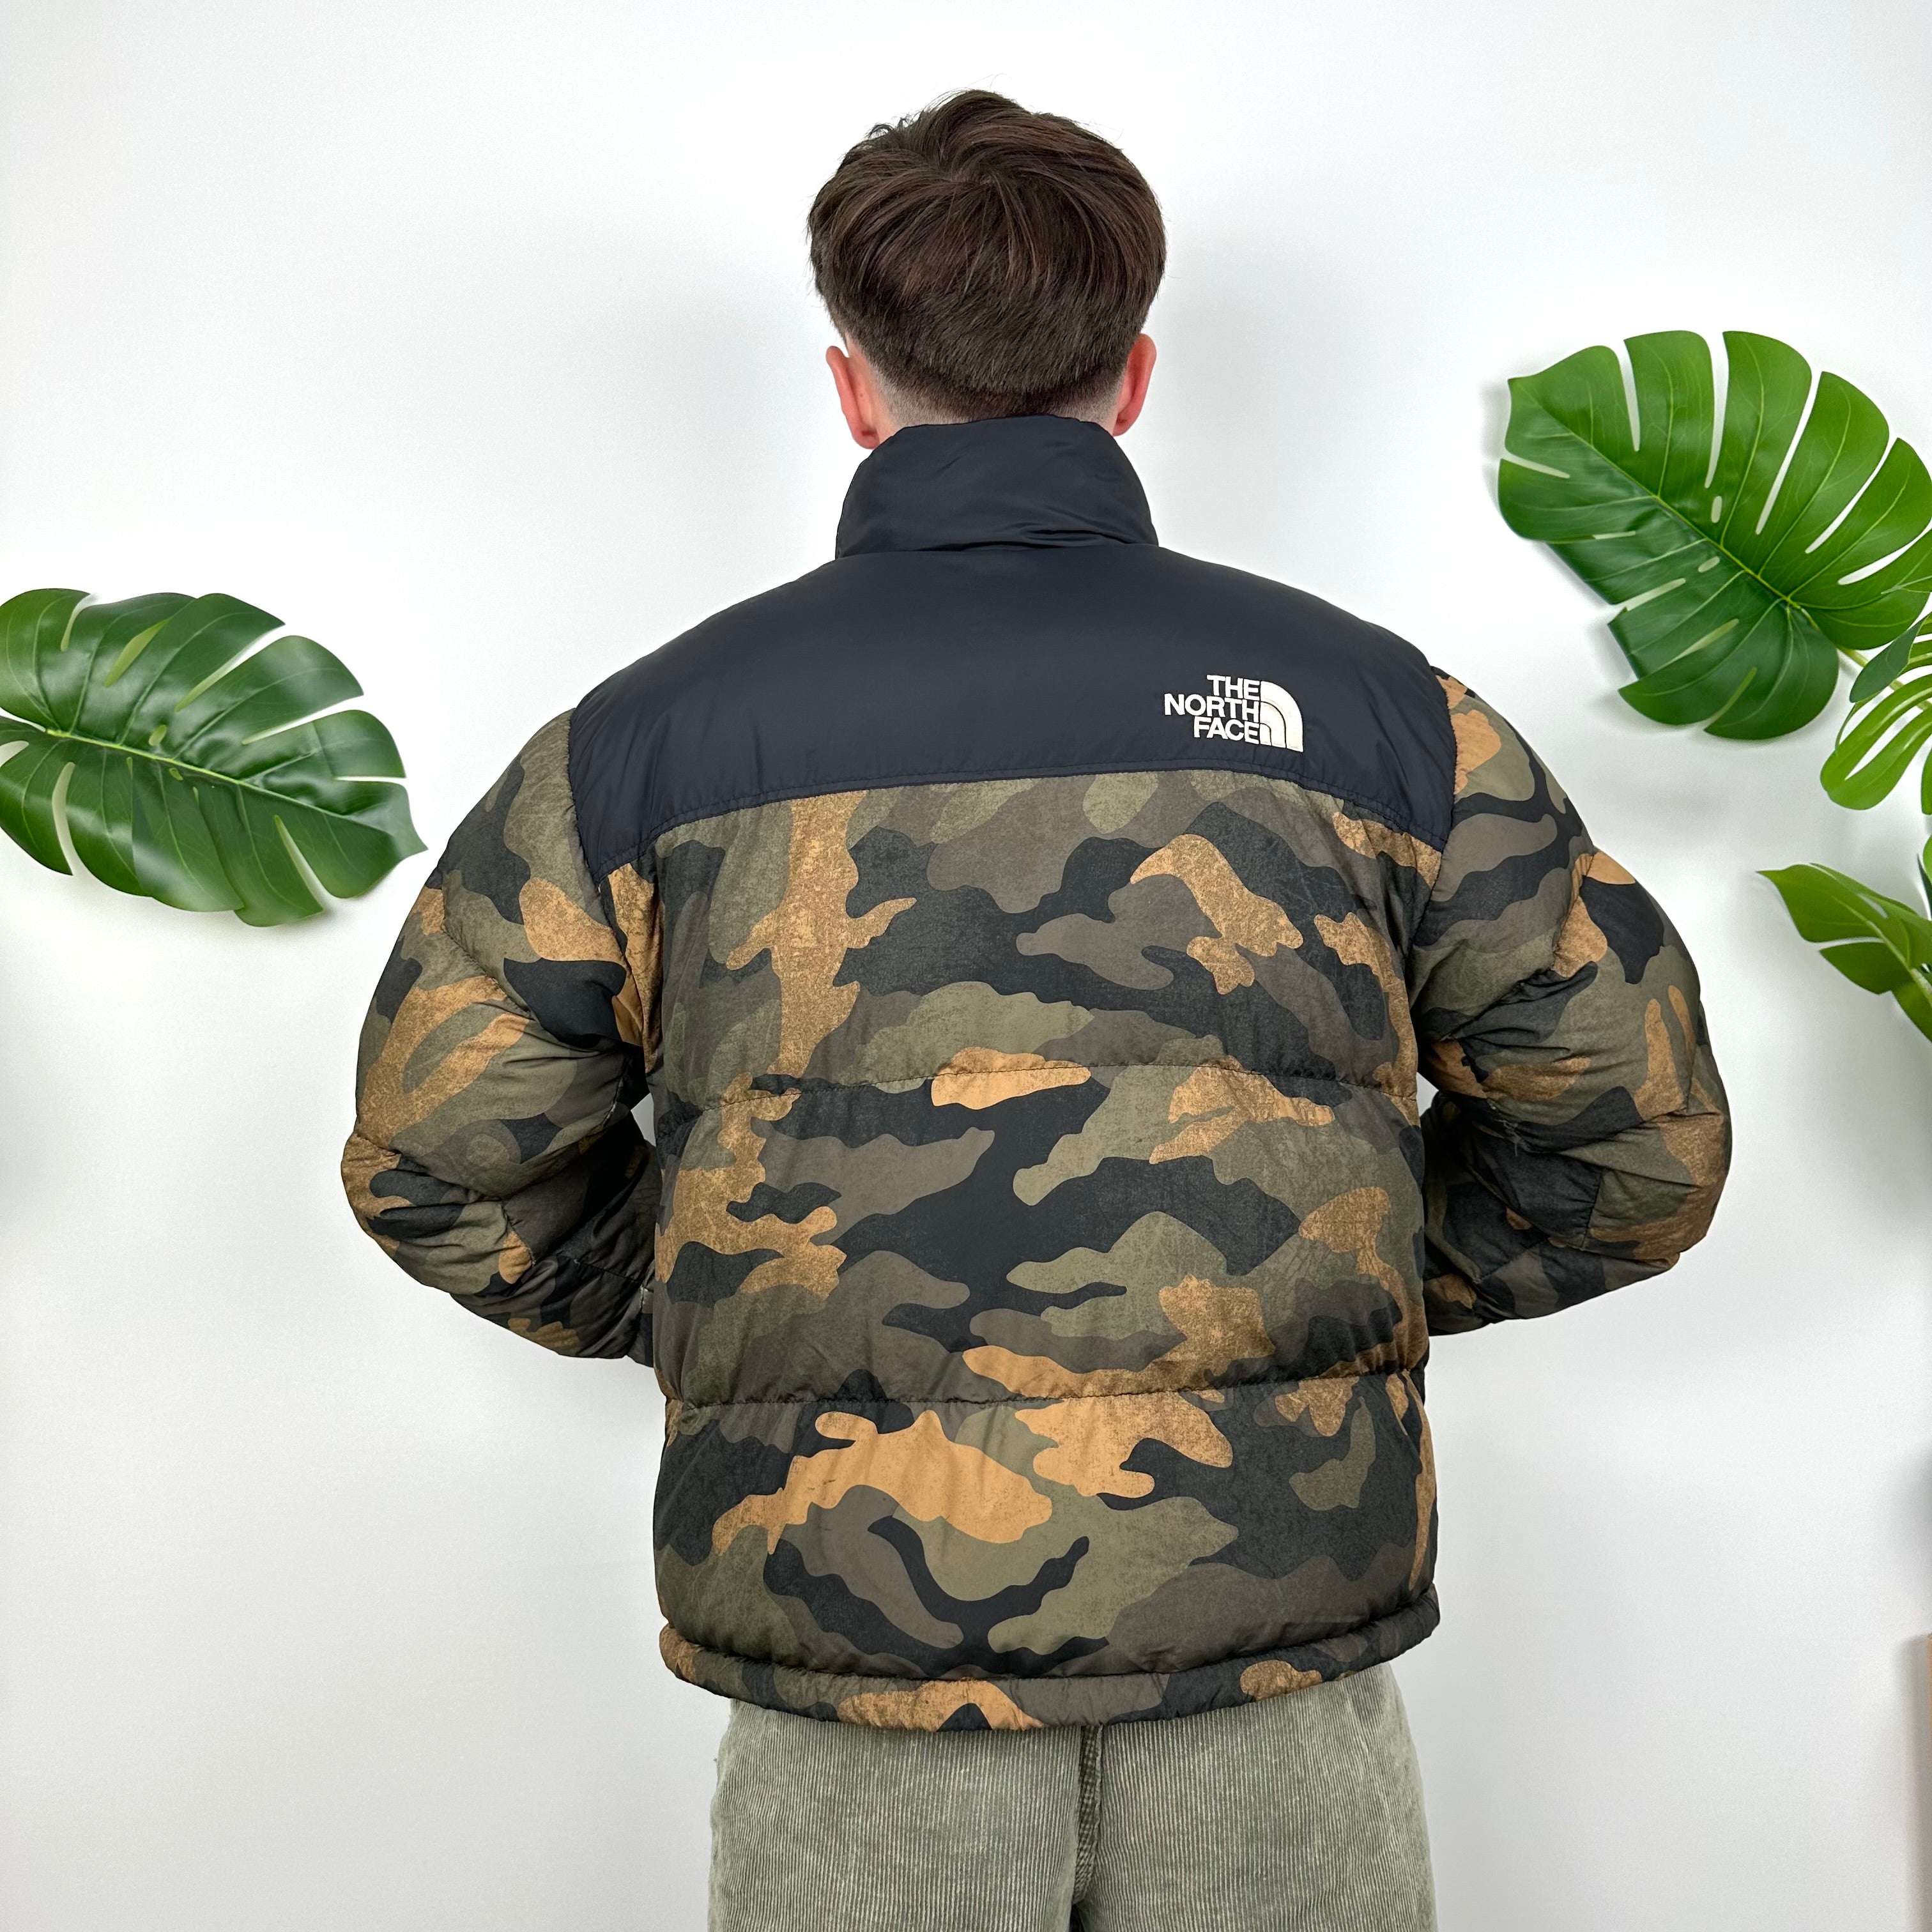 North Face Camouflage Puffer Jacket (M)